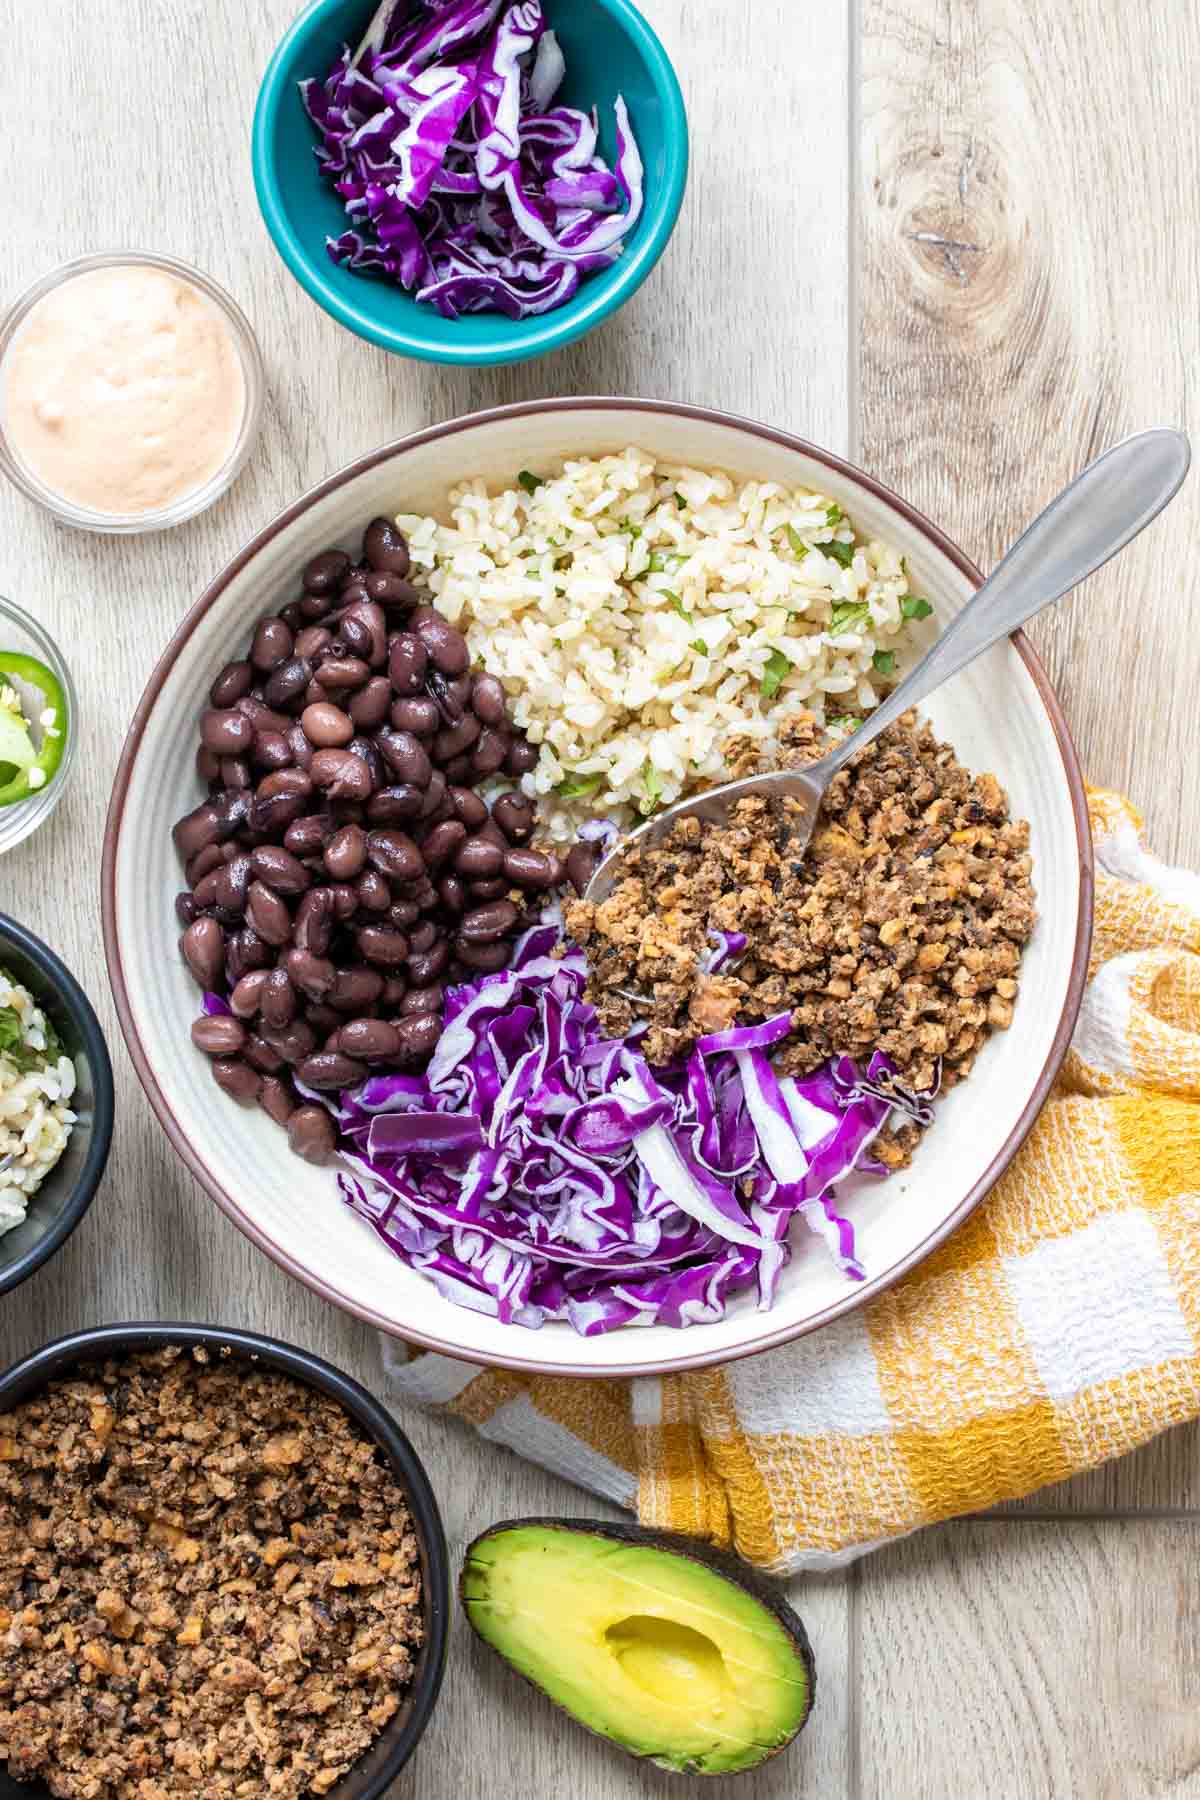 A cream colored bowl with rice, lentil taco meat, beans and cabbage inside on a light wooden surface